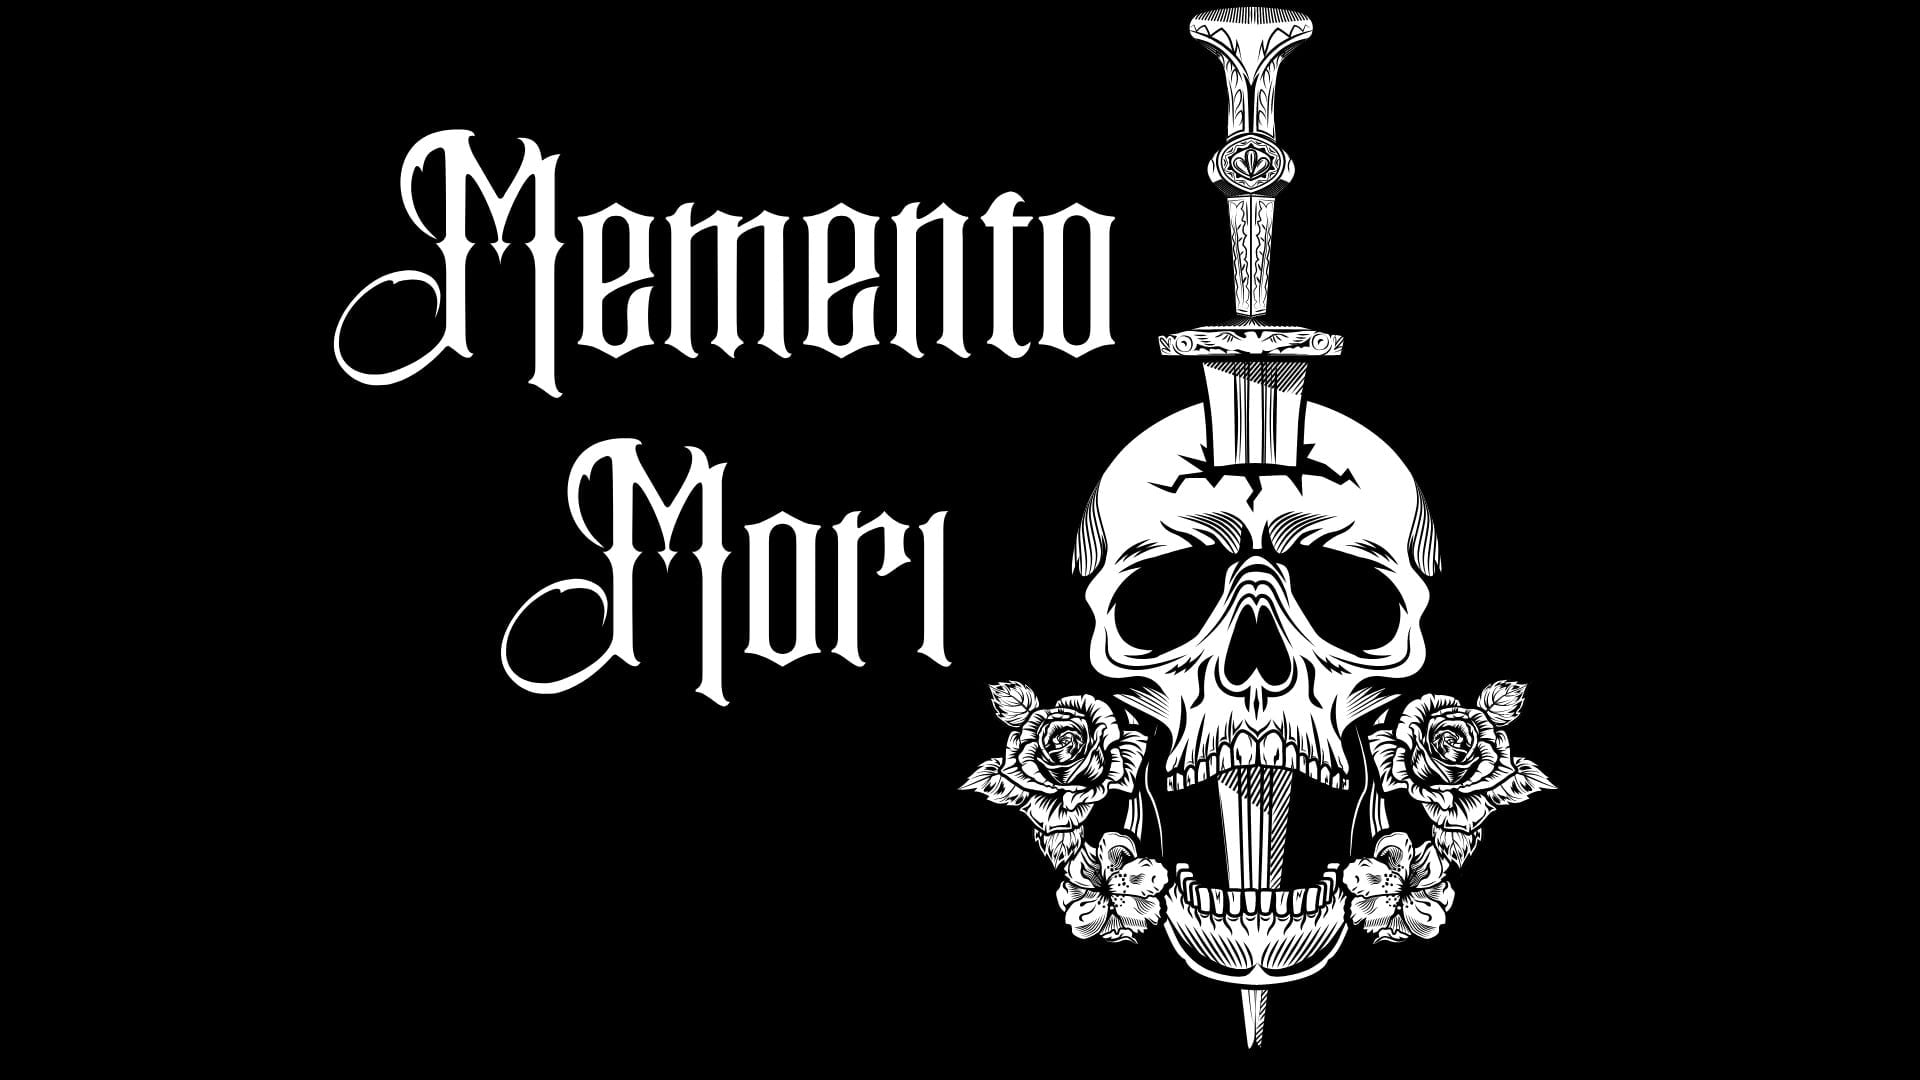 Unveiling The Memento Mori Tattoo Meaning A Profound Insight